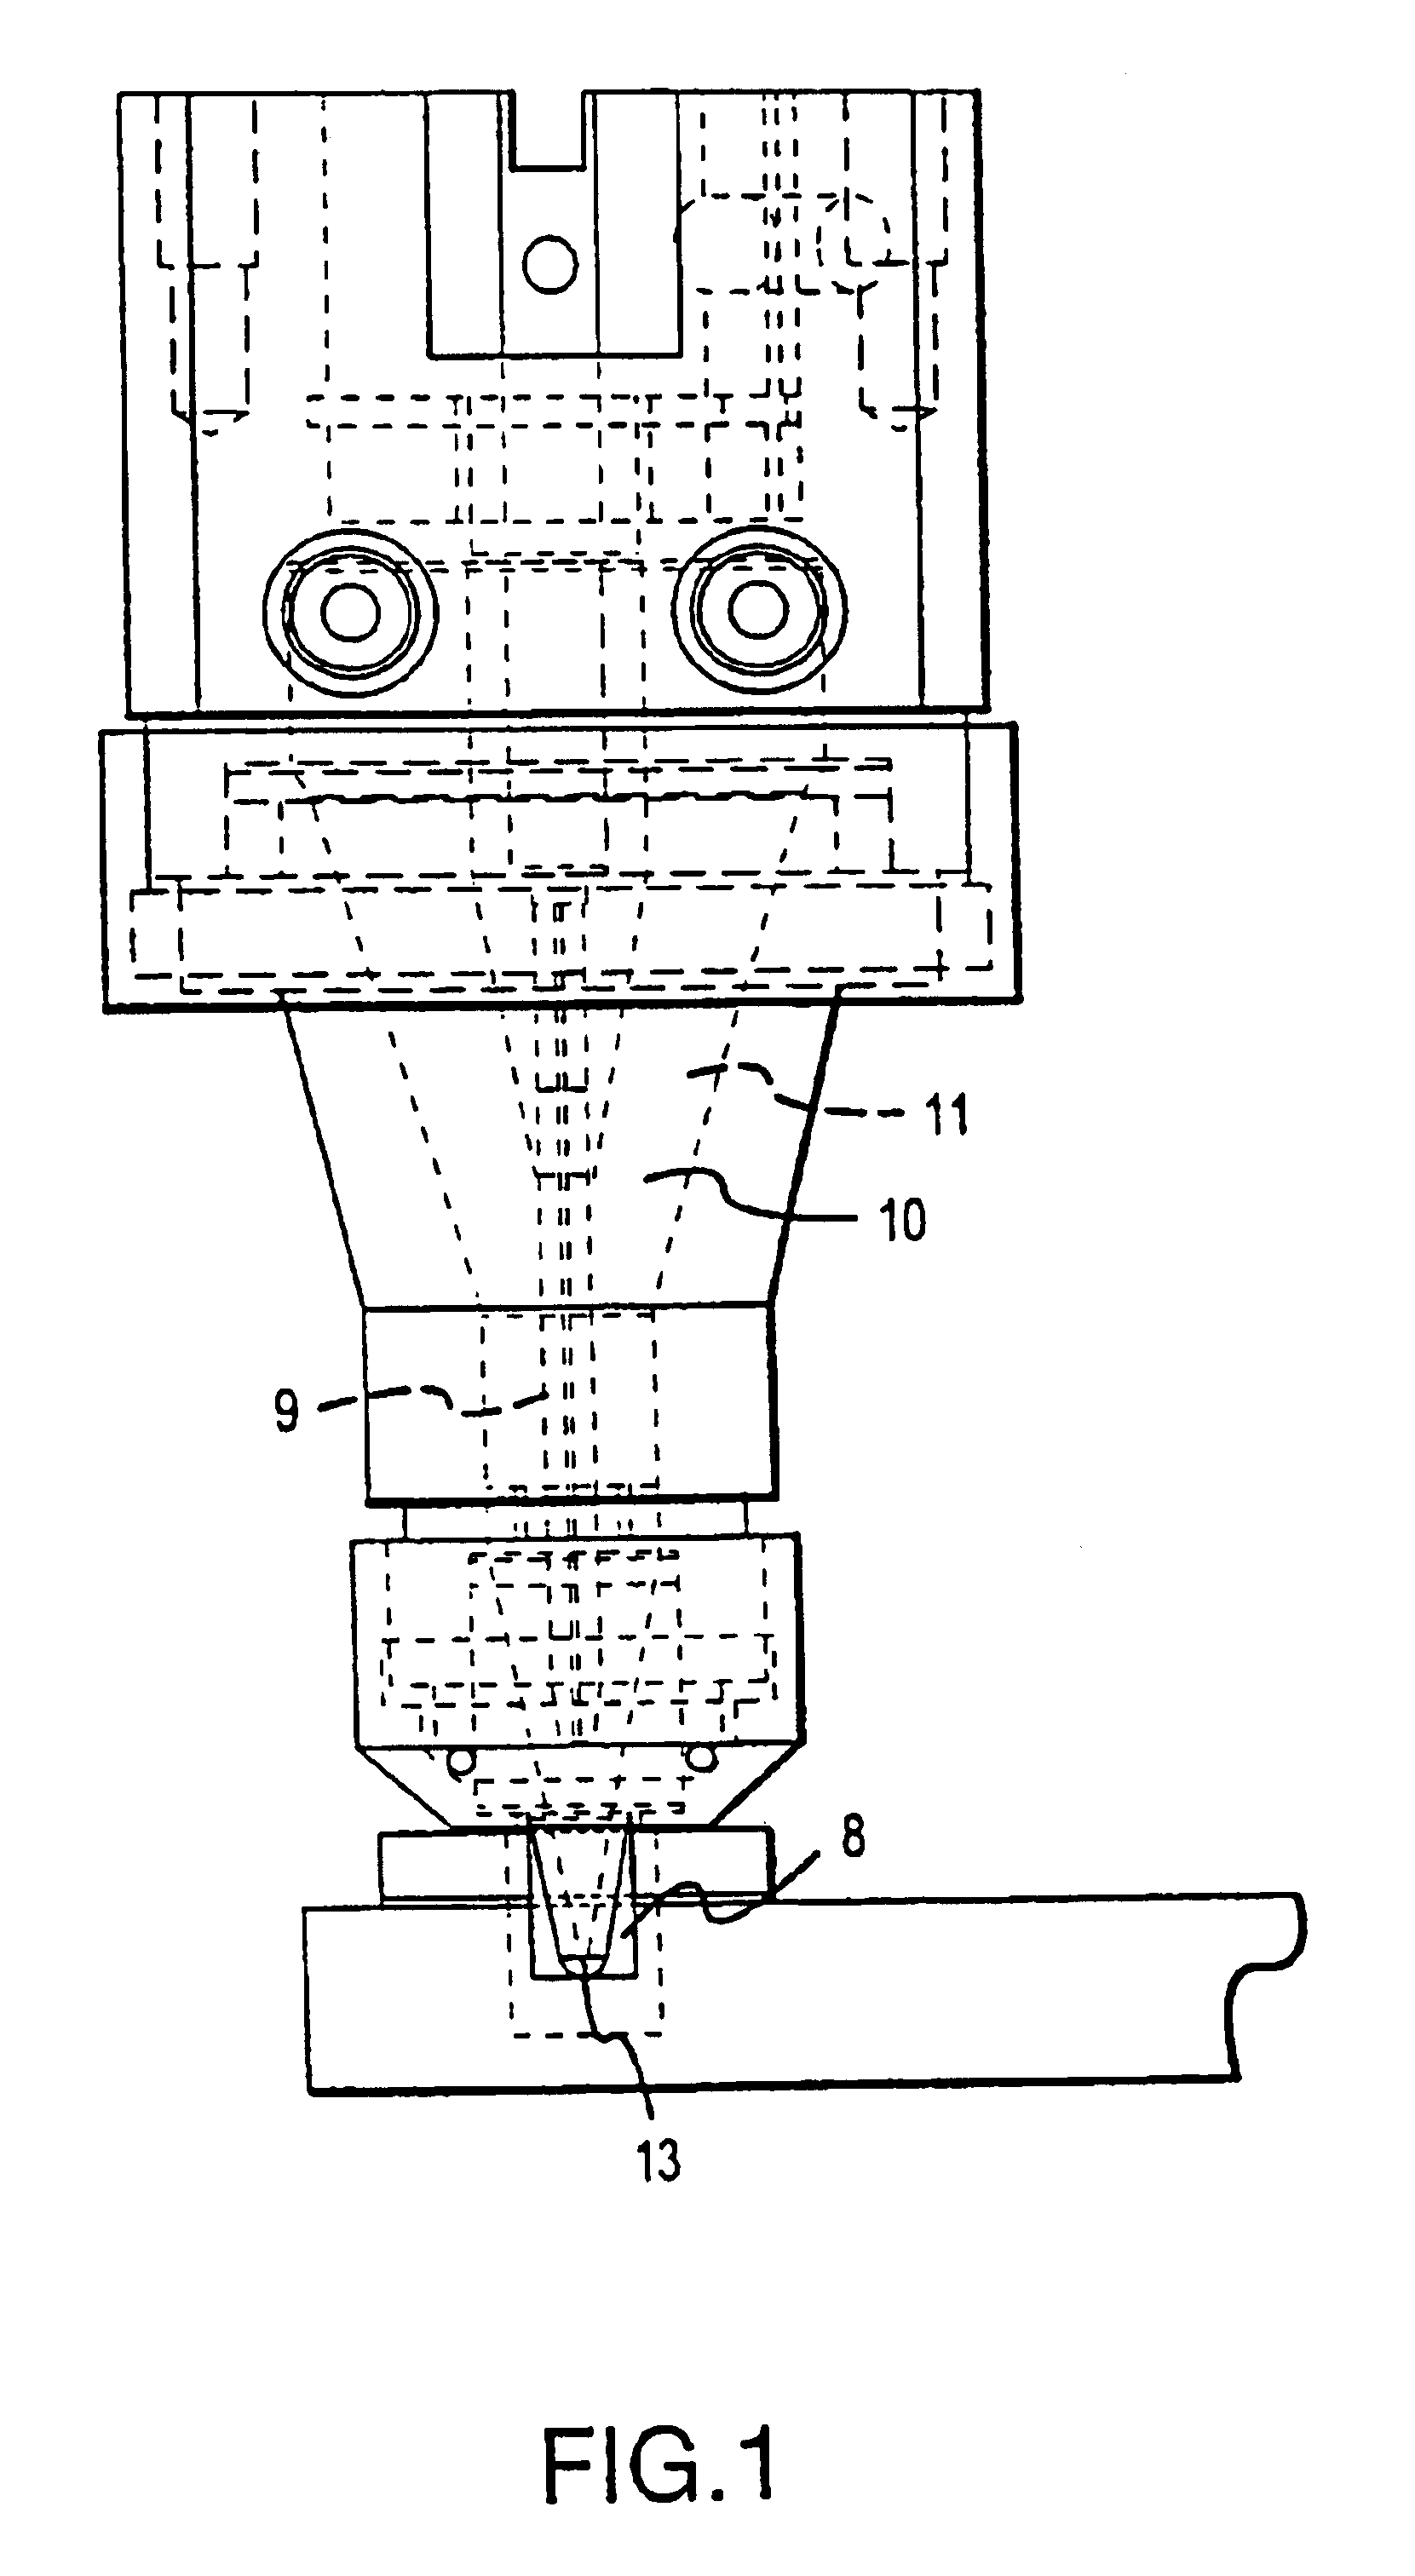 Vibratory system for a sorting flow cytometer